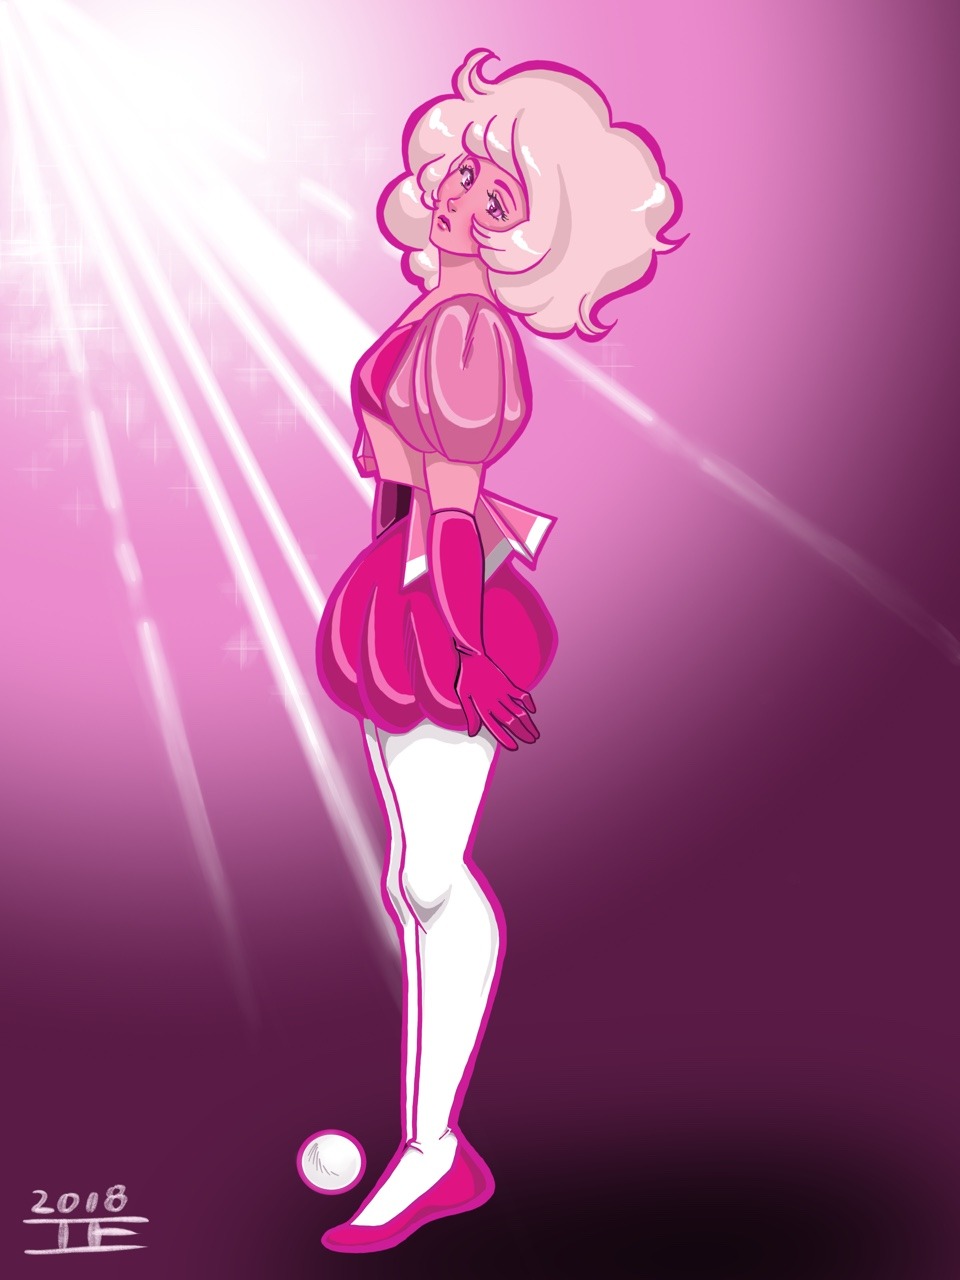 So I just now saw the latest episode of Steven Universe called “A Single Pale Rose”. I gotta say that I am excited for what’s to come next. After almost 150 episodes we are seeing more about the...